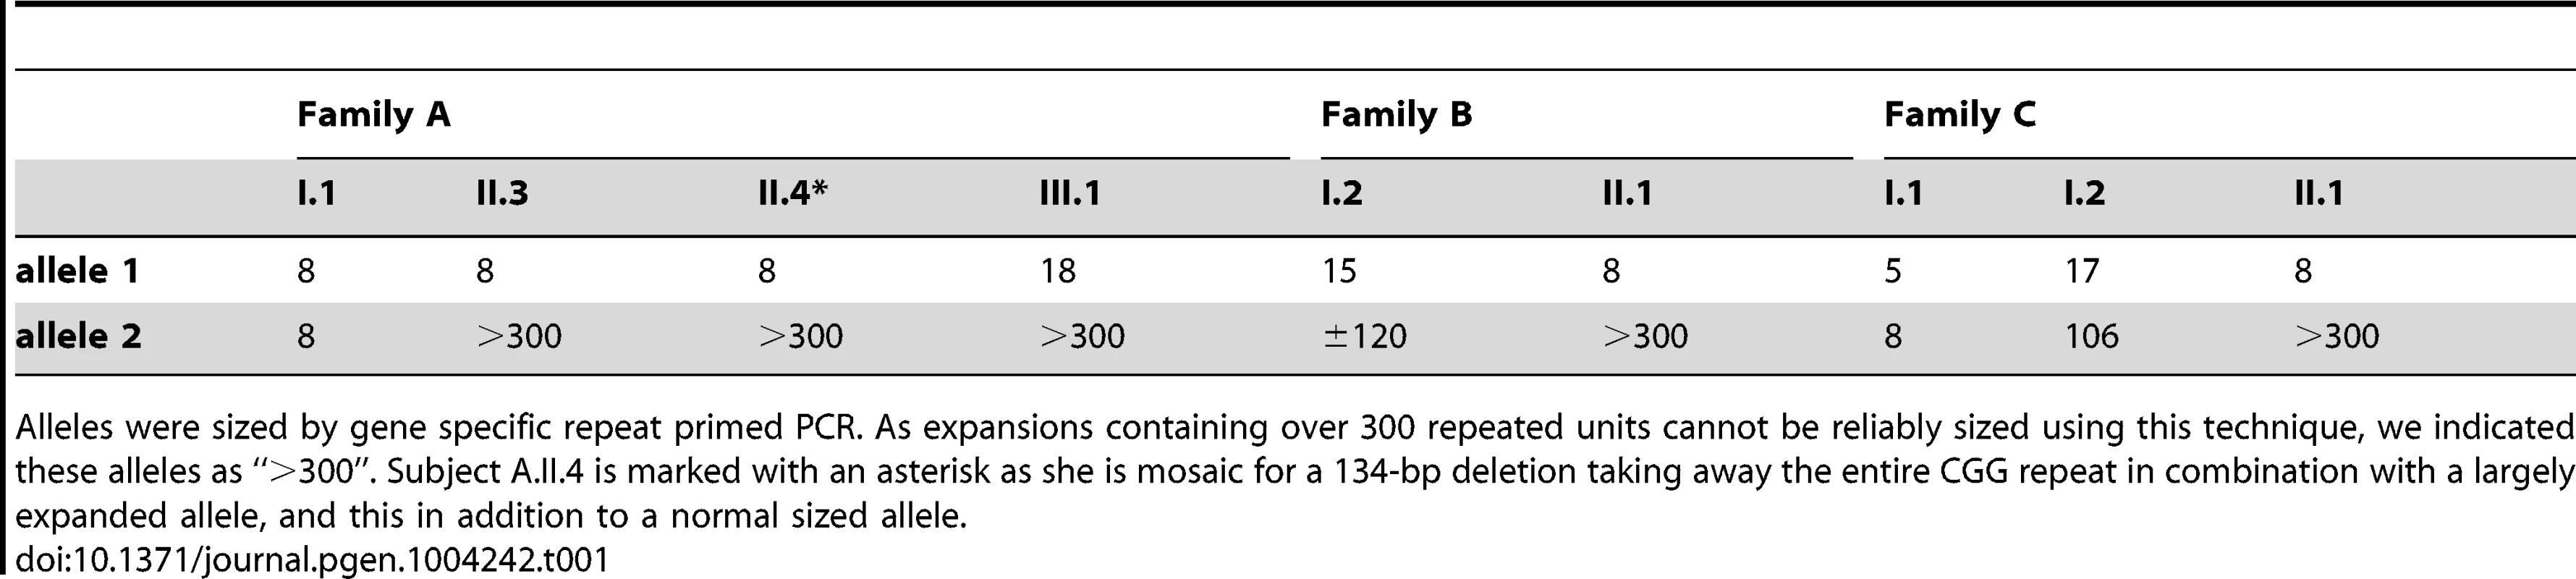 Sizing the repeat in all available family members with gene specific repeat primed PCR.